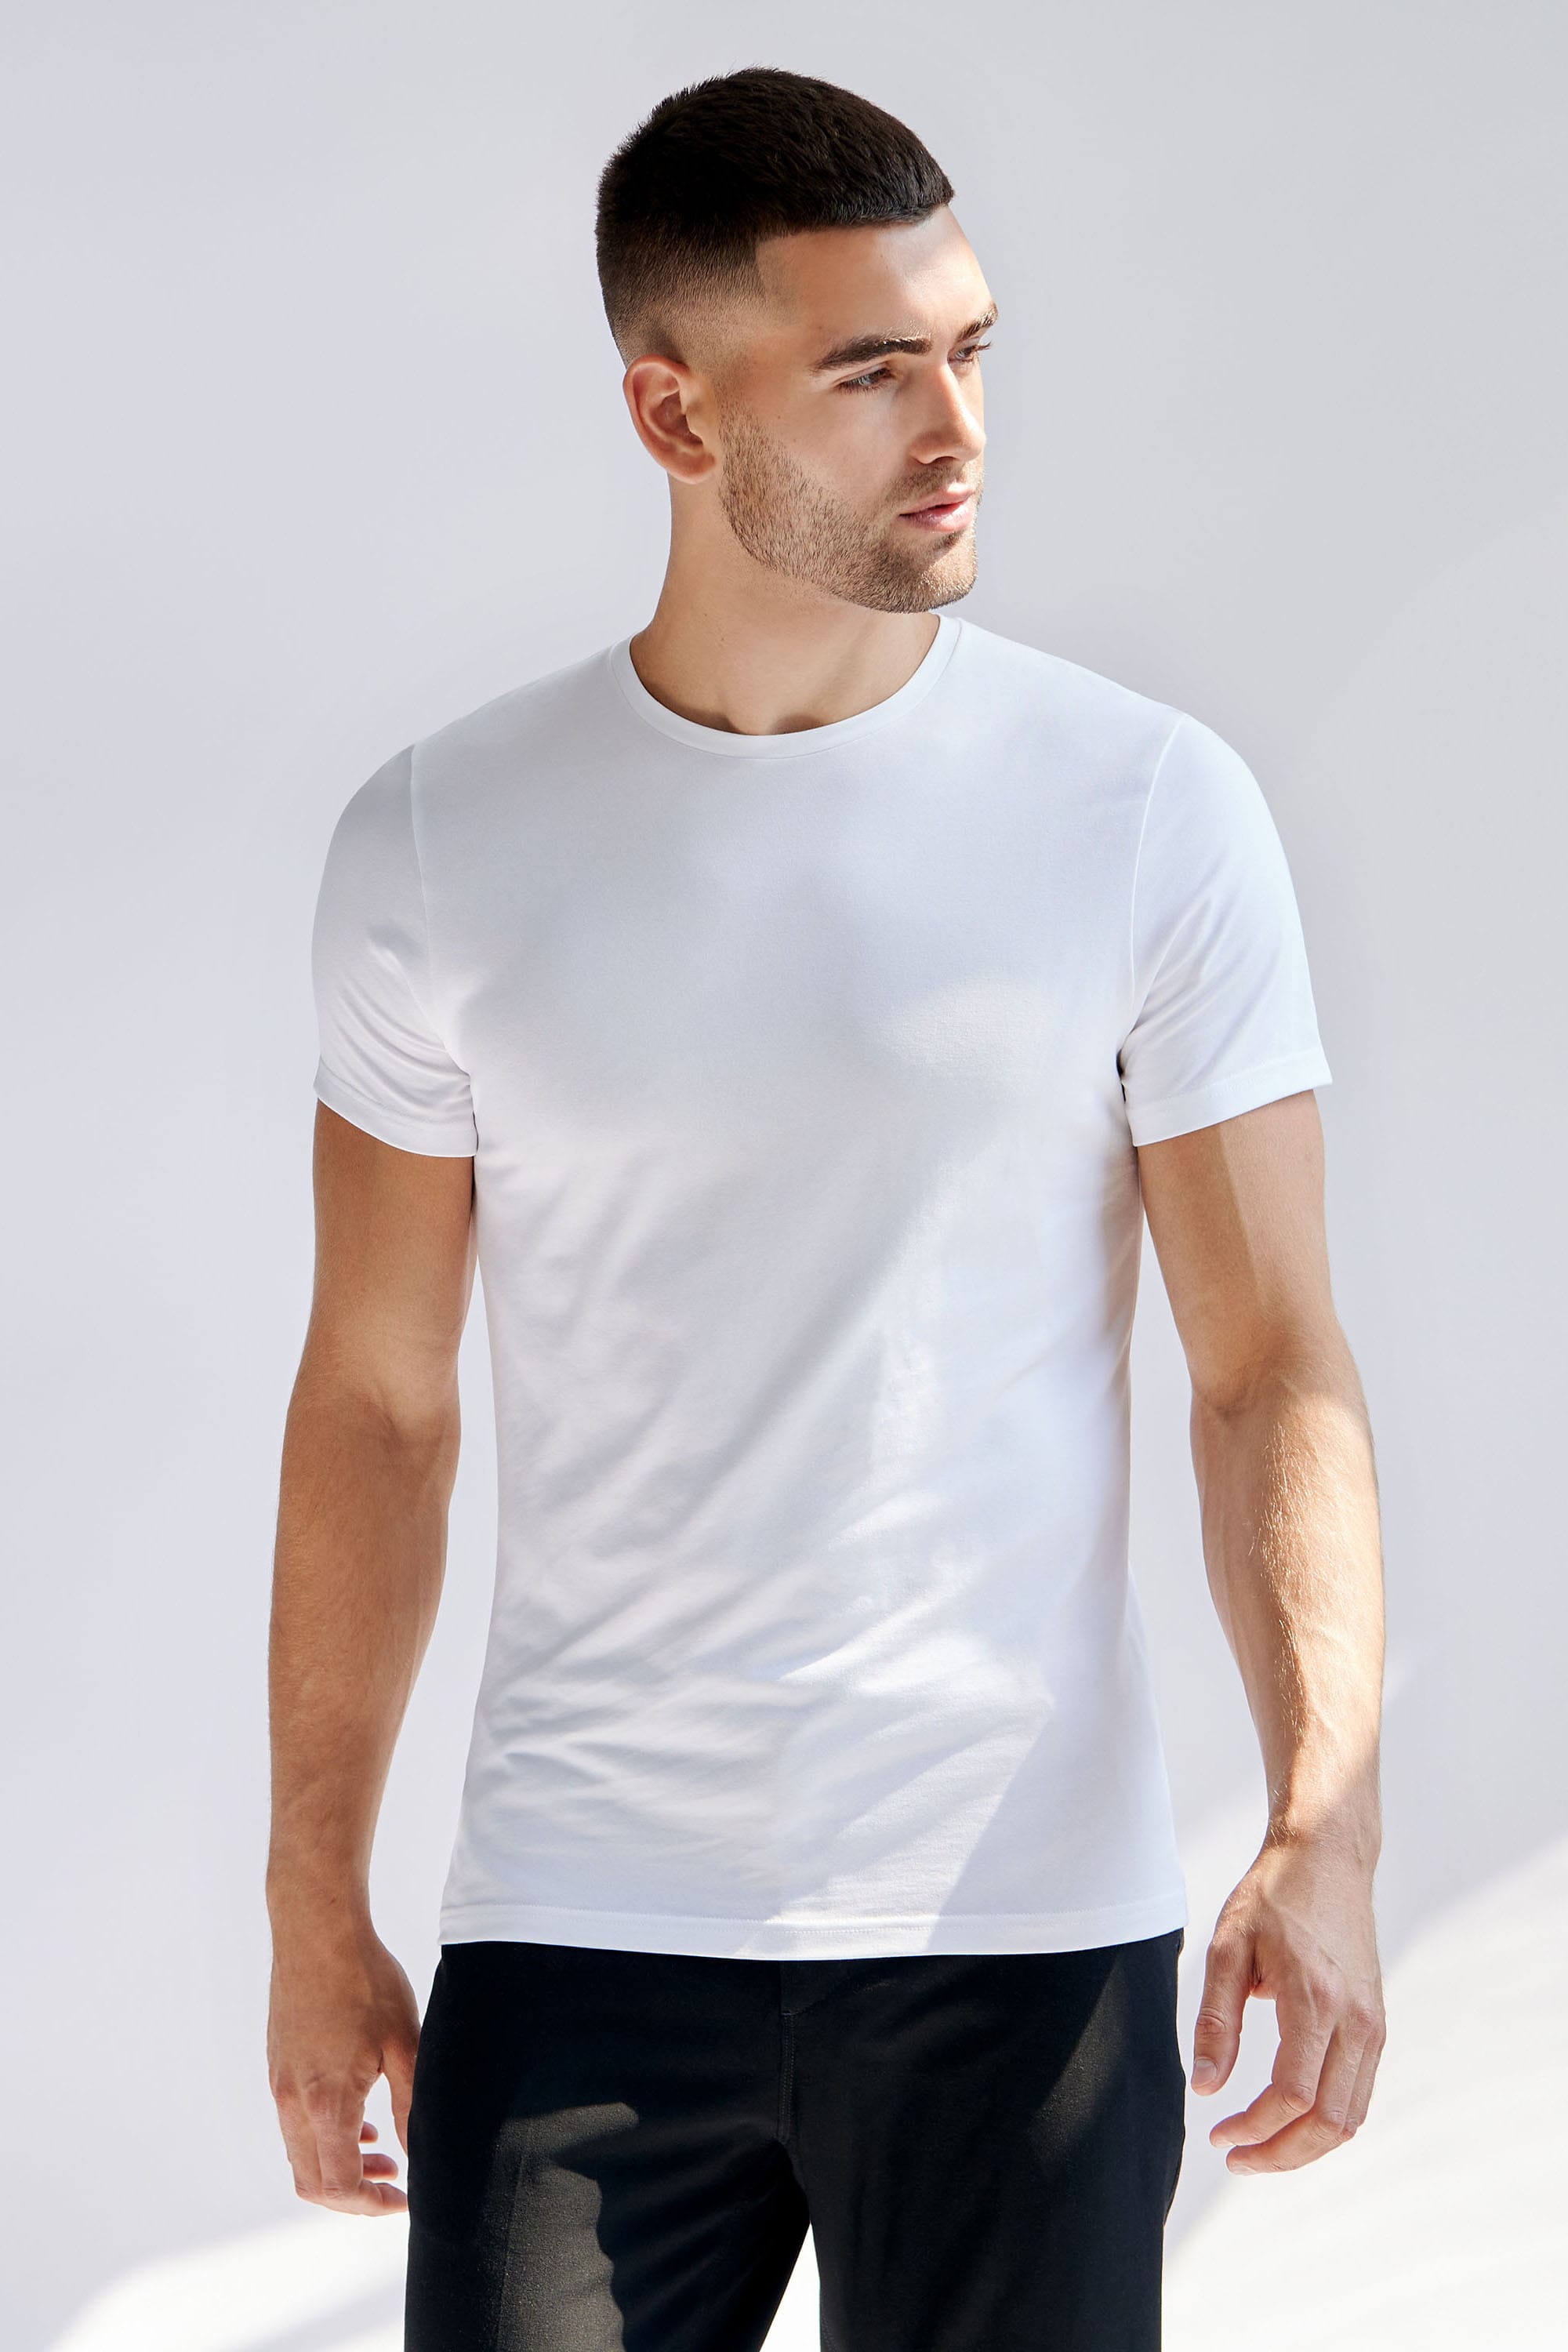 Duplicate Cyber ​​space Larry Belmont Men's Crew-Neck white T-shirt made of organic cotton and elastane - Bread &  Boxers